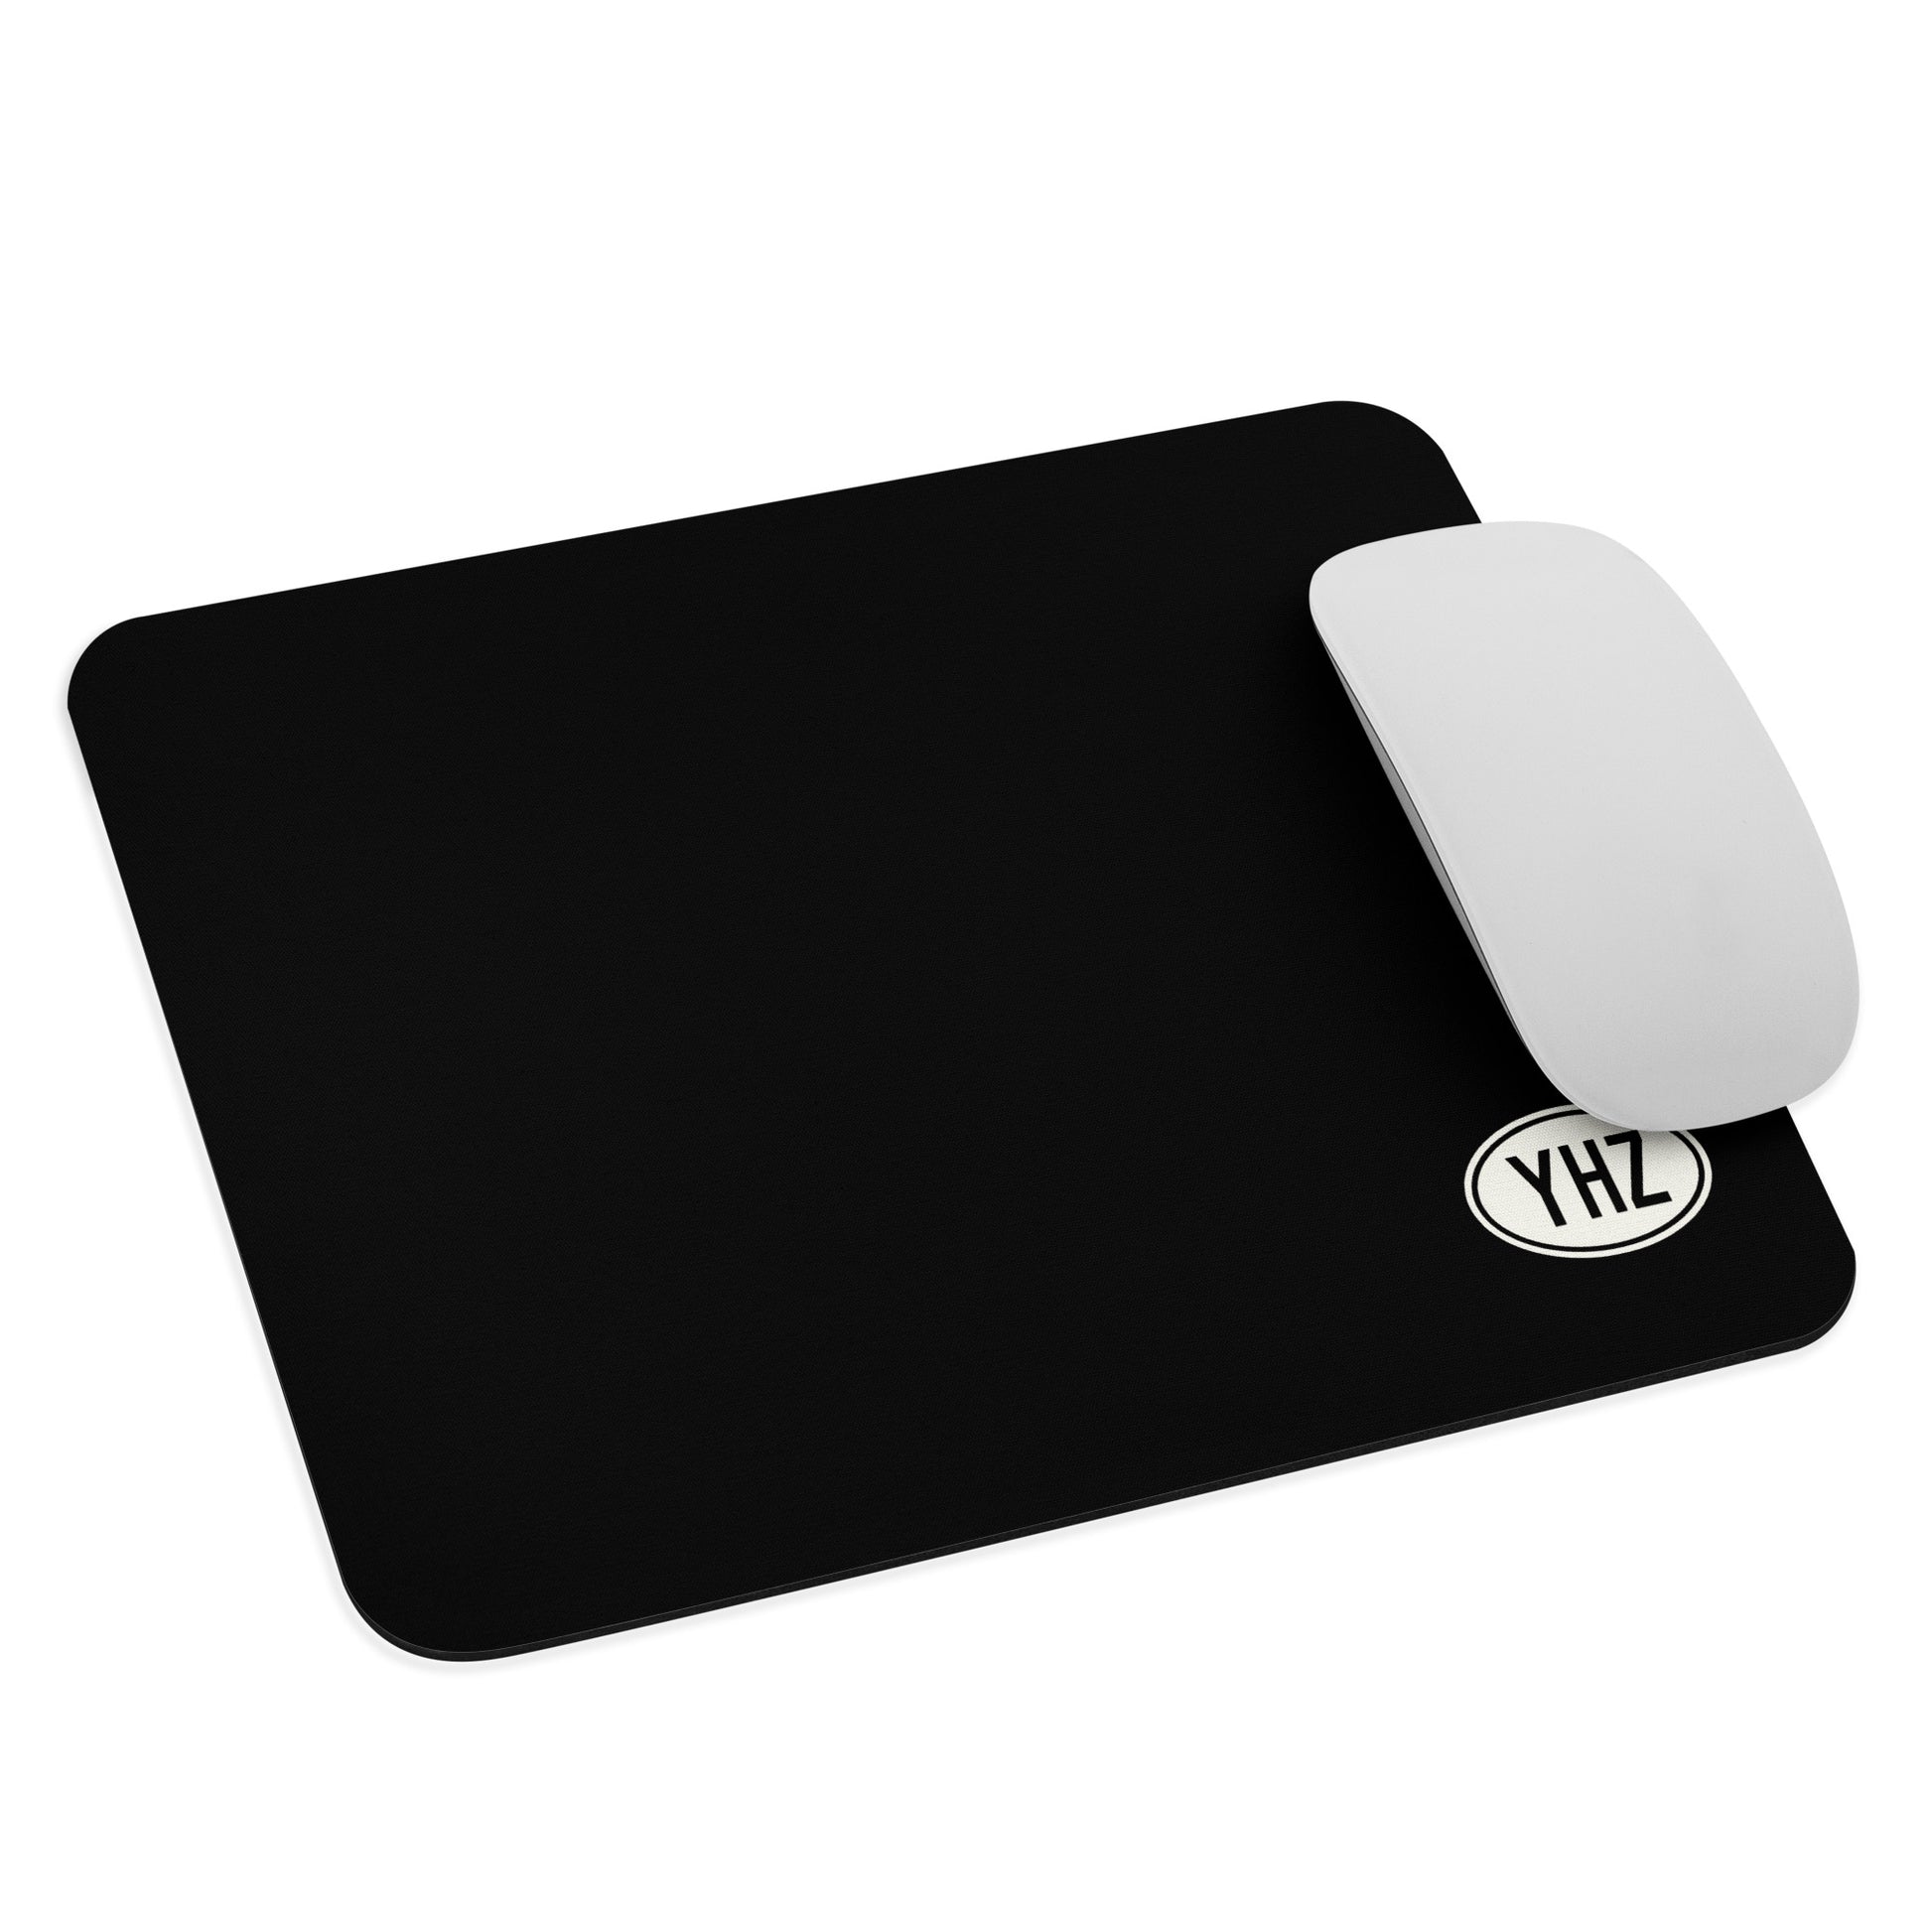 Unique Travel Gift Mouse Pad - White Oval • YHZ Halifax • YHM Designs - Image 03